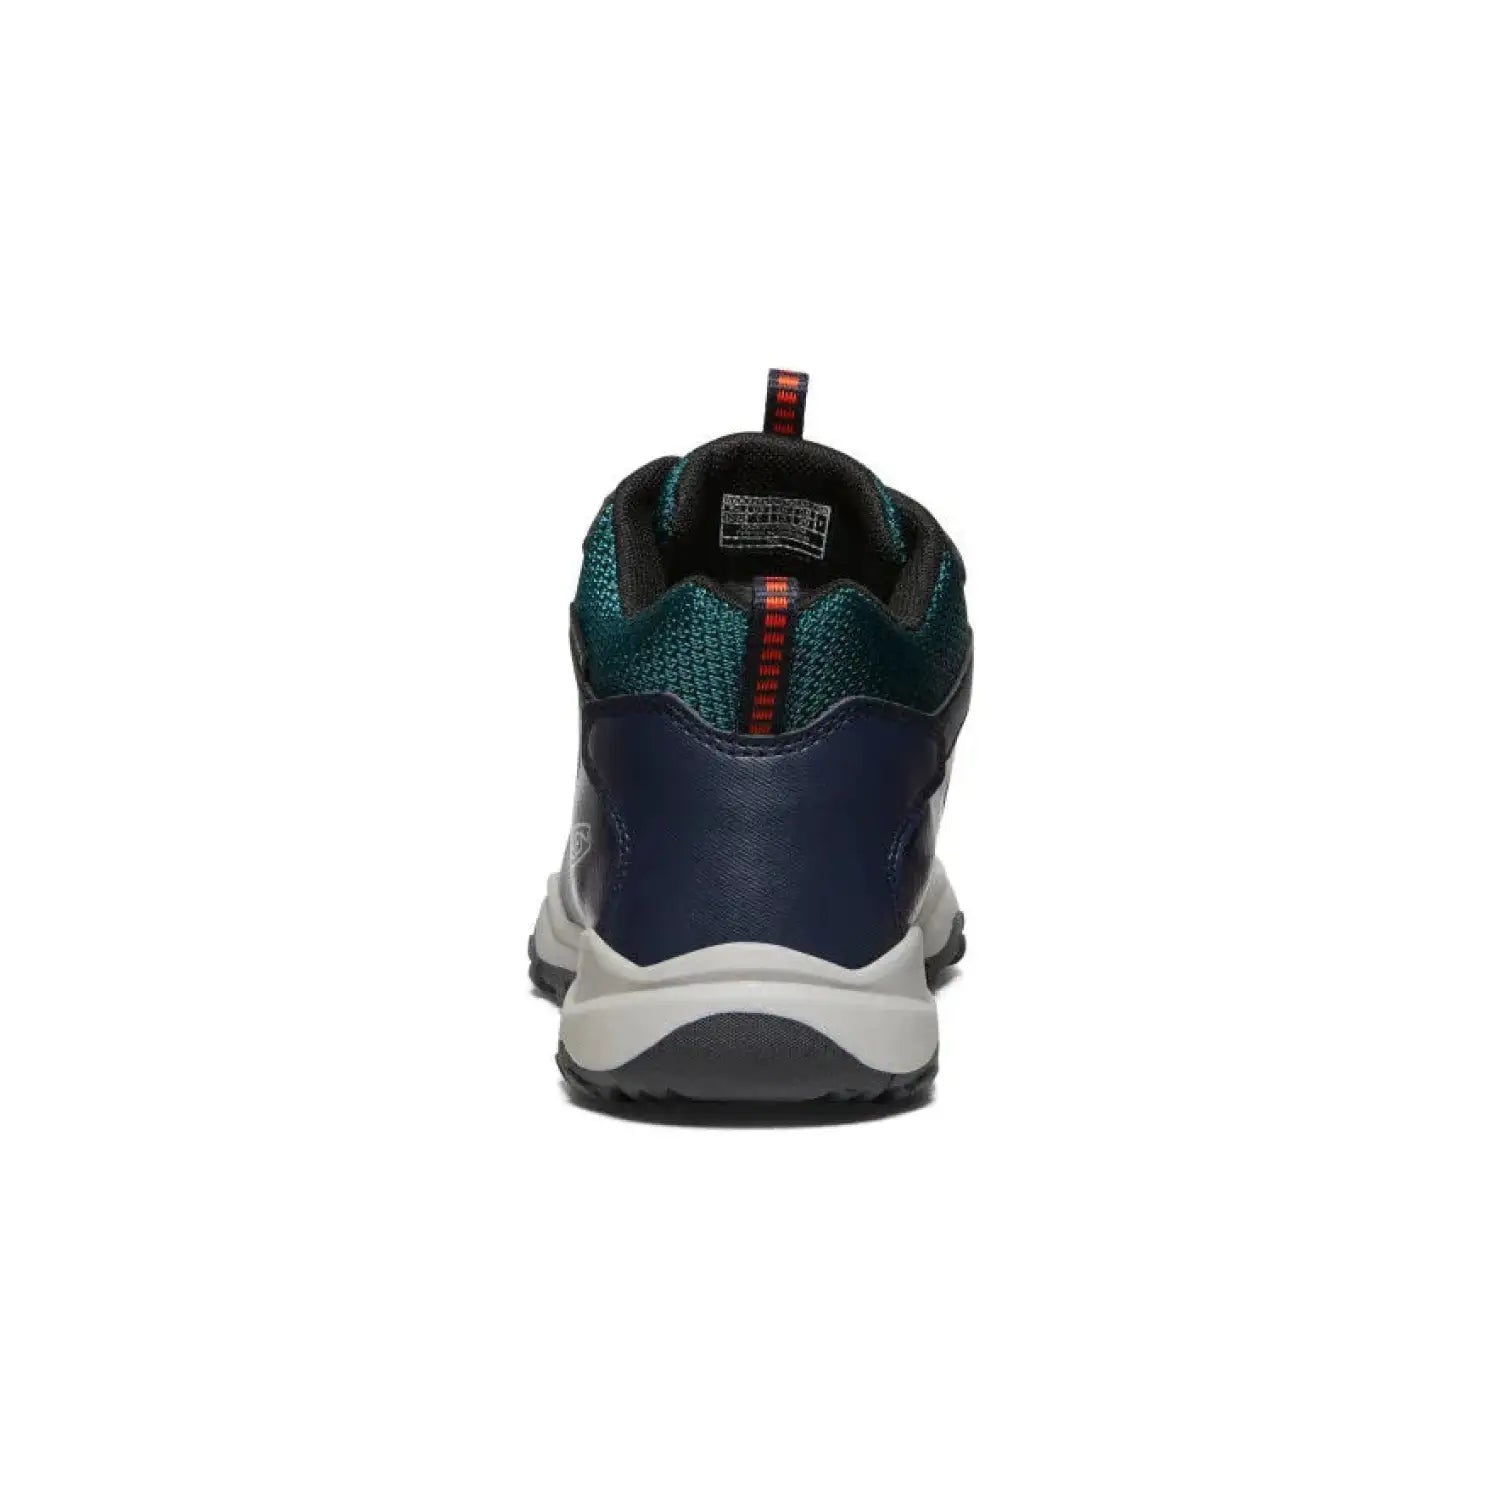 Keen's Wanduro Waterproof Boot in Sky Captain blue and Sea Moss green, red lace eyelets and black pull laces. Back View.